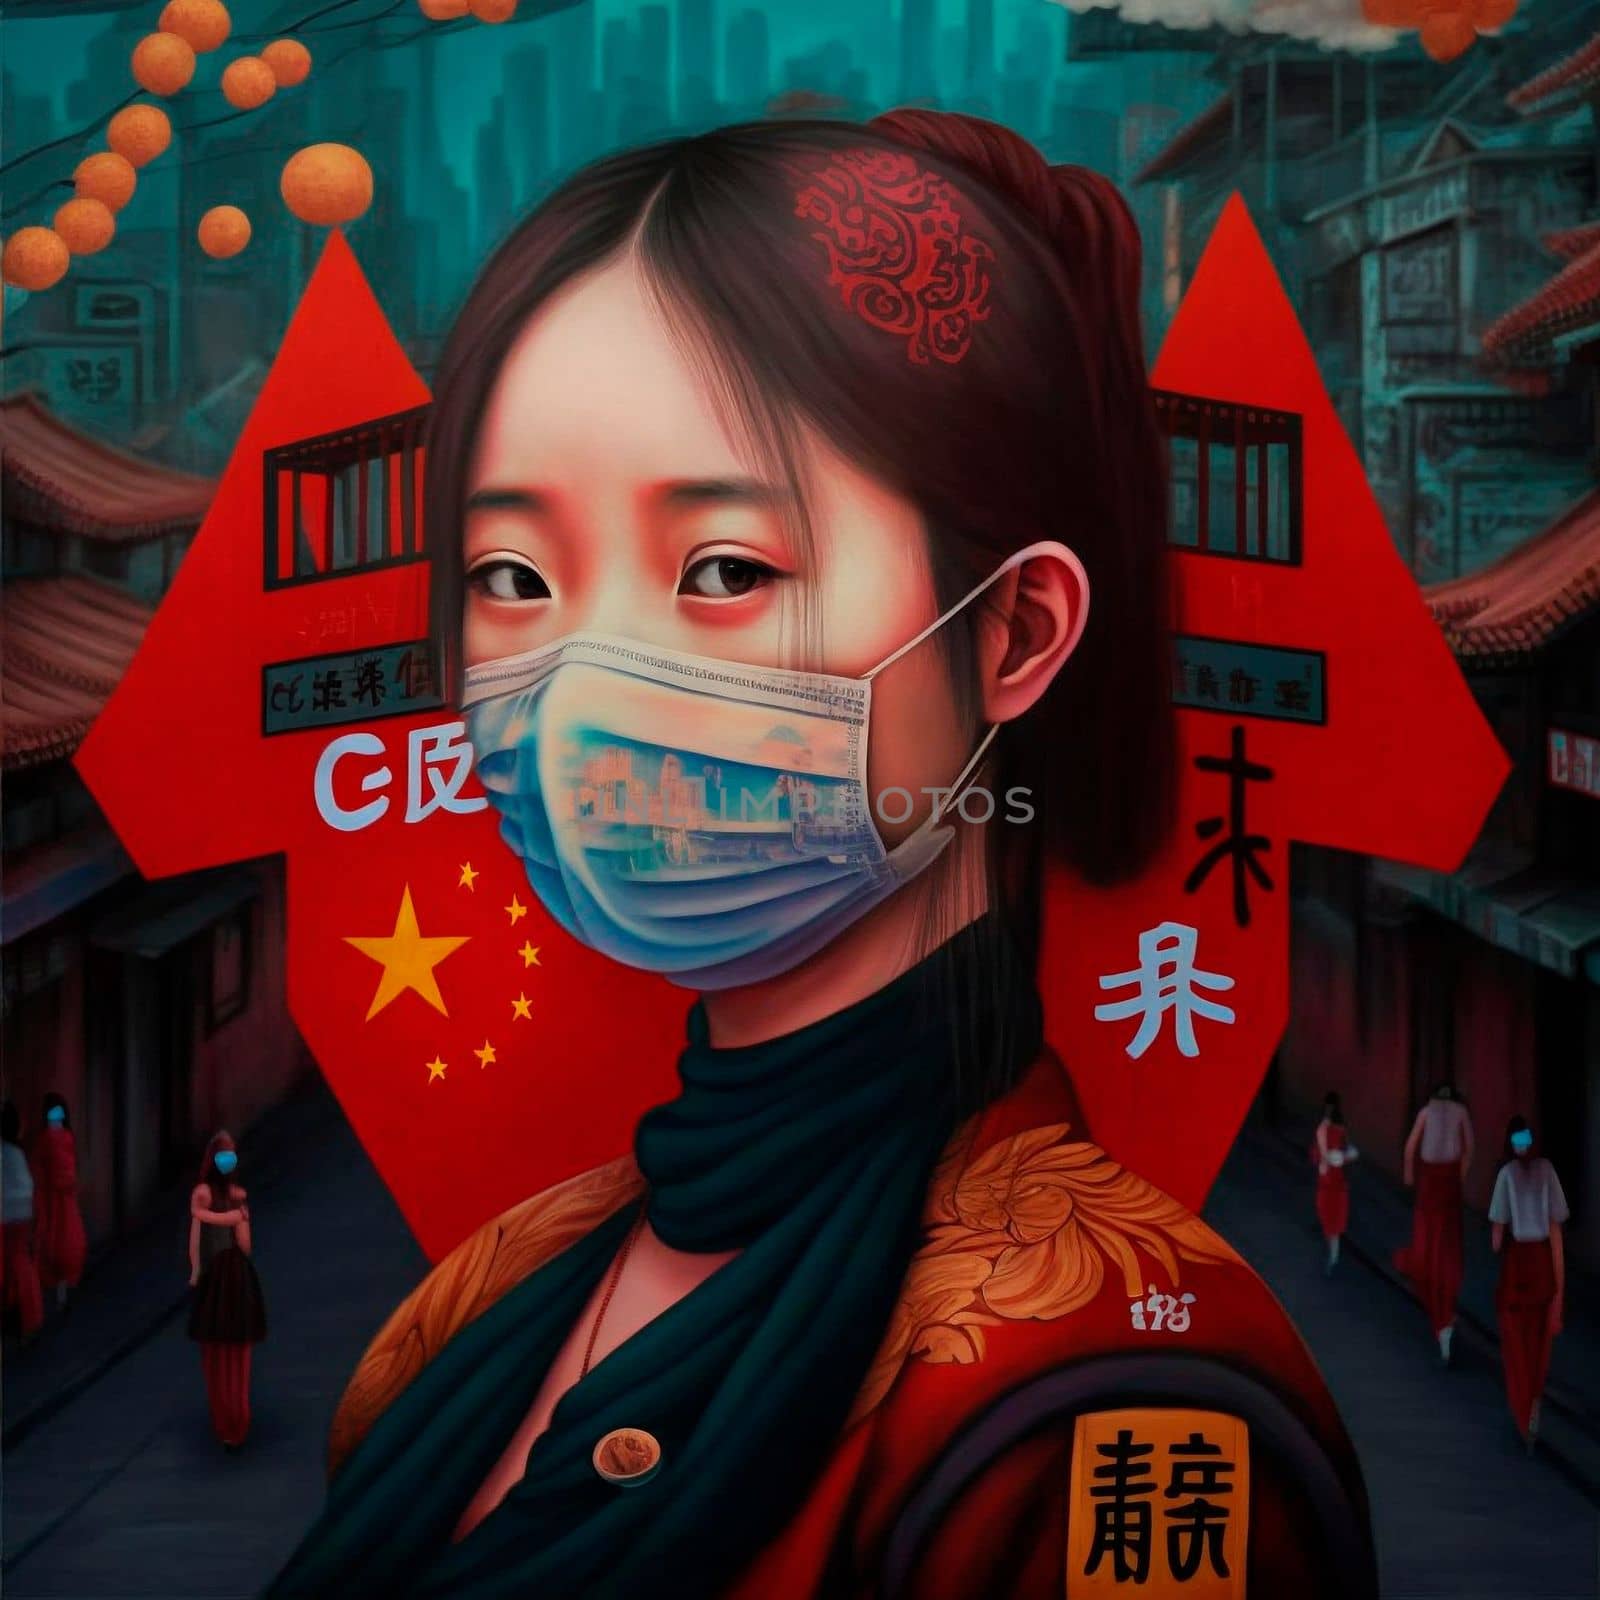 China zero covid policy, masked girl.Poster. High quality illustration